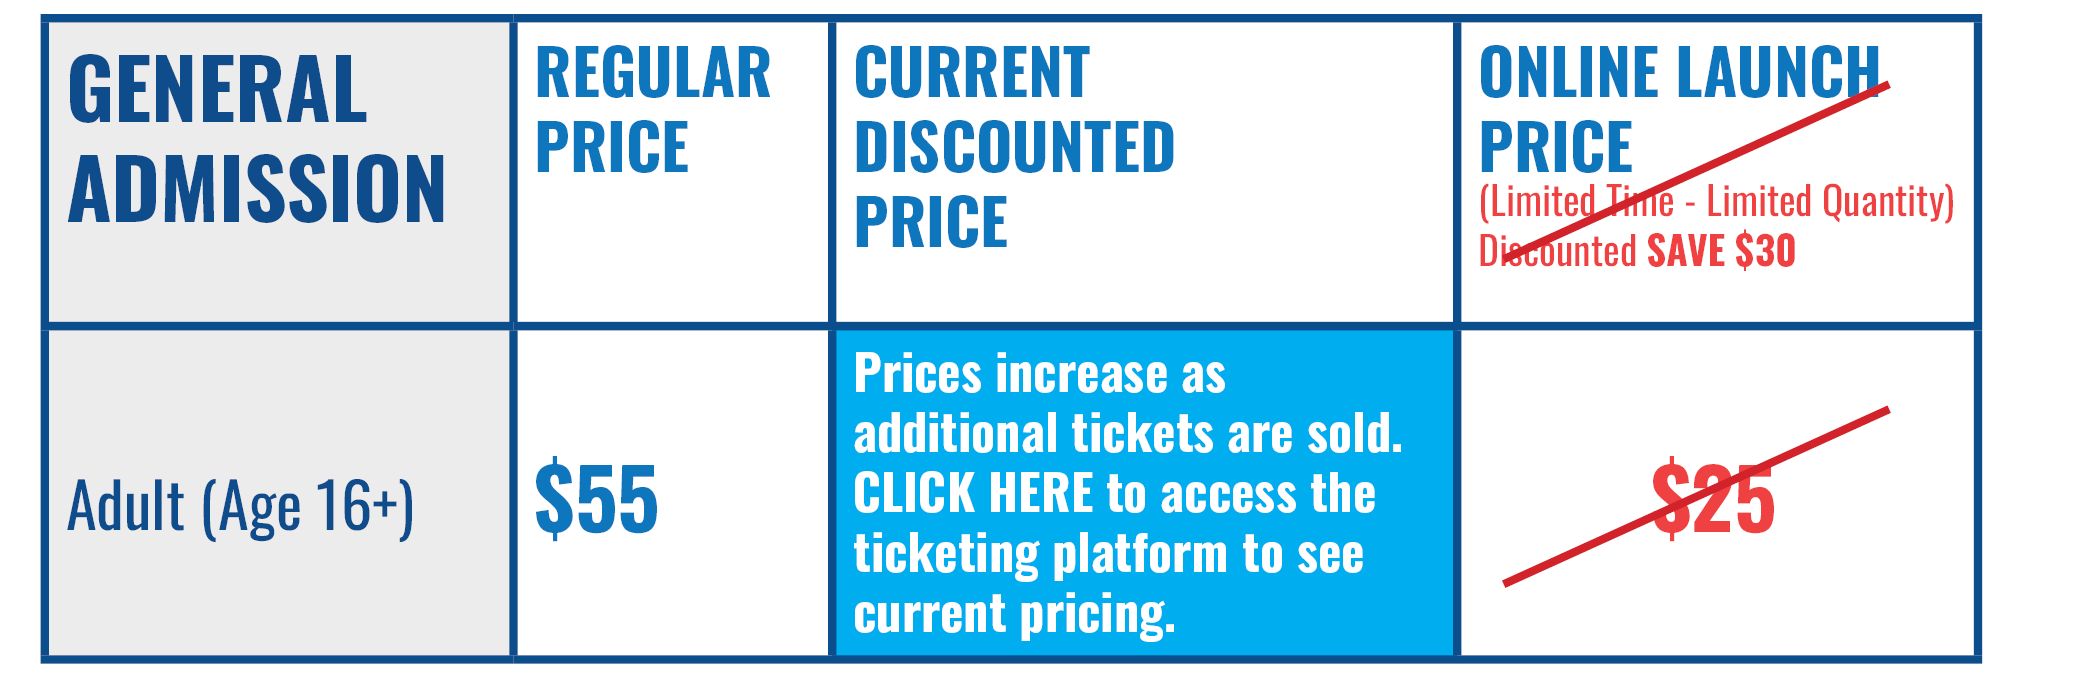 General Admission Ticket Chart - Reference Description